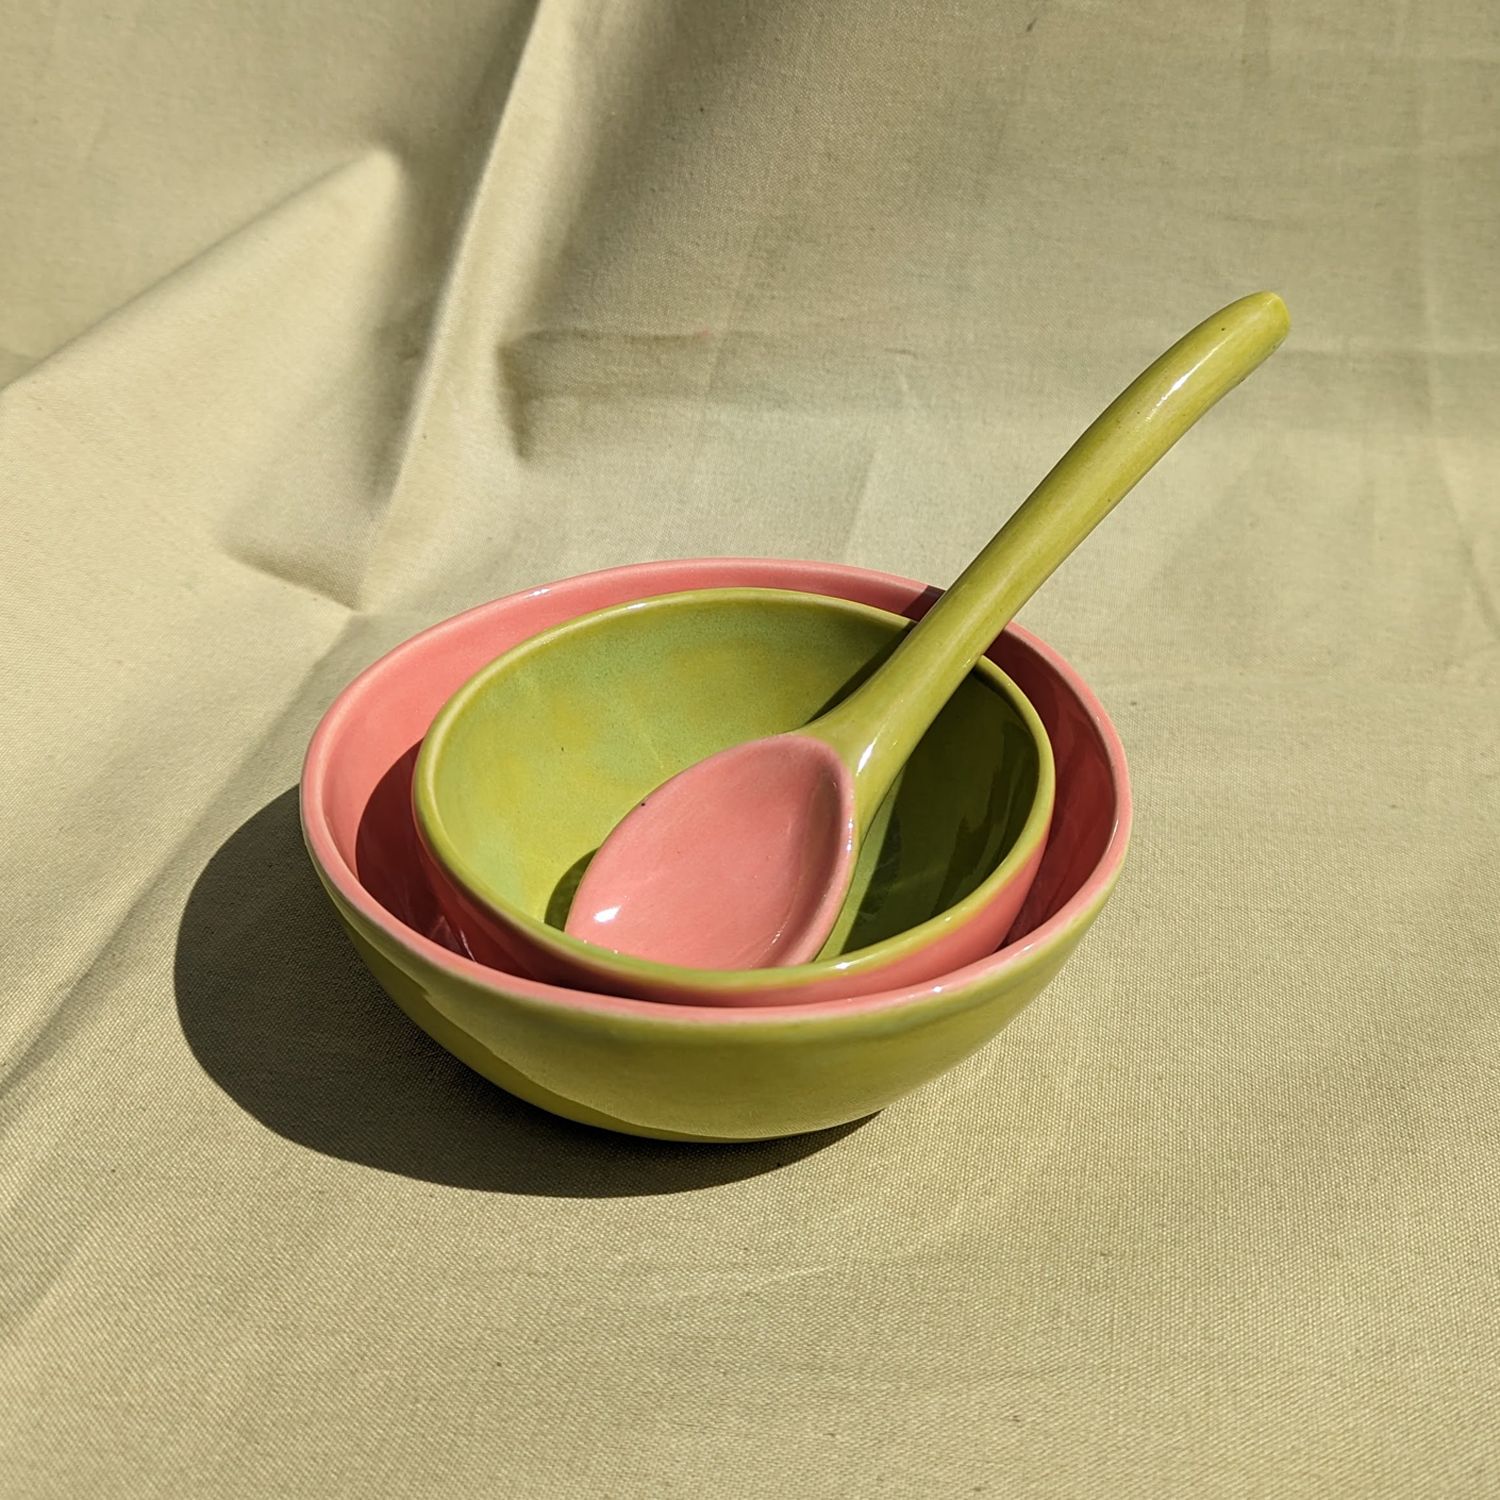 Wendy Nichol: Small Ice Cream Bowl – Assorted Colours Product Image 2 of 5